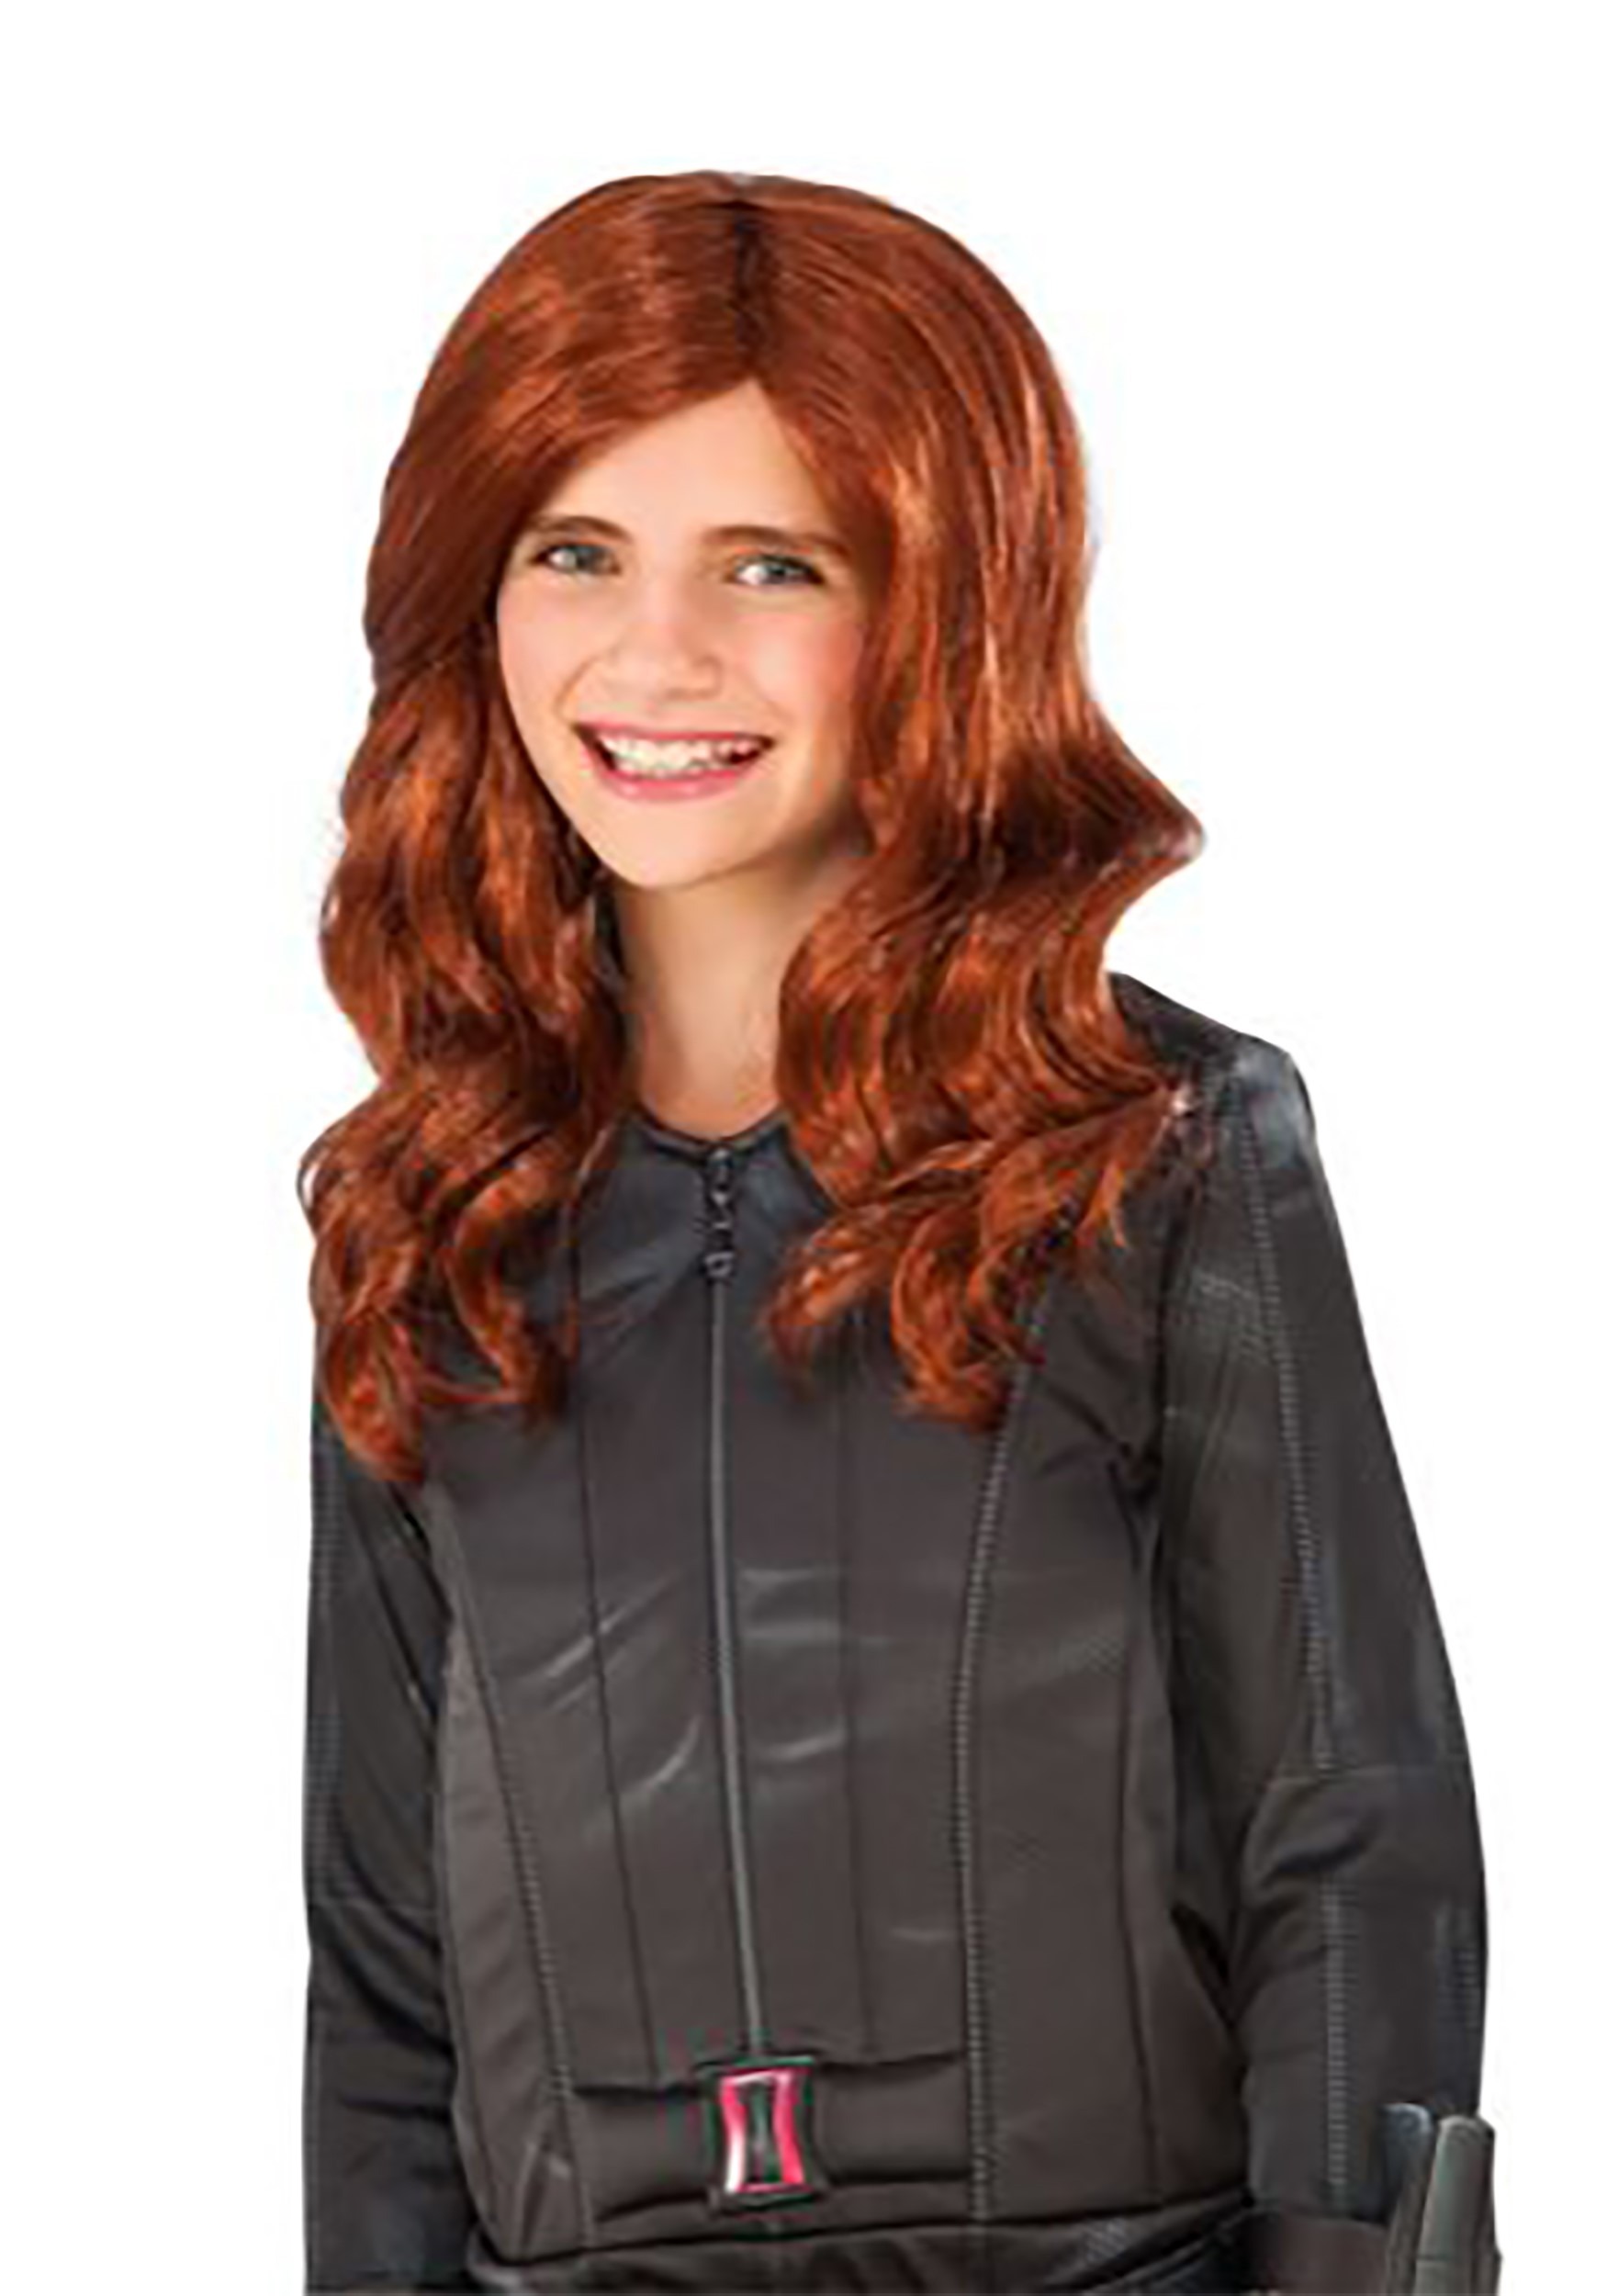 Avengers 2 Age of Ultron Child's Black Widow Wig 